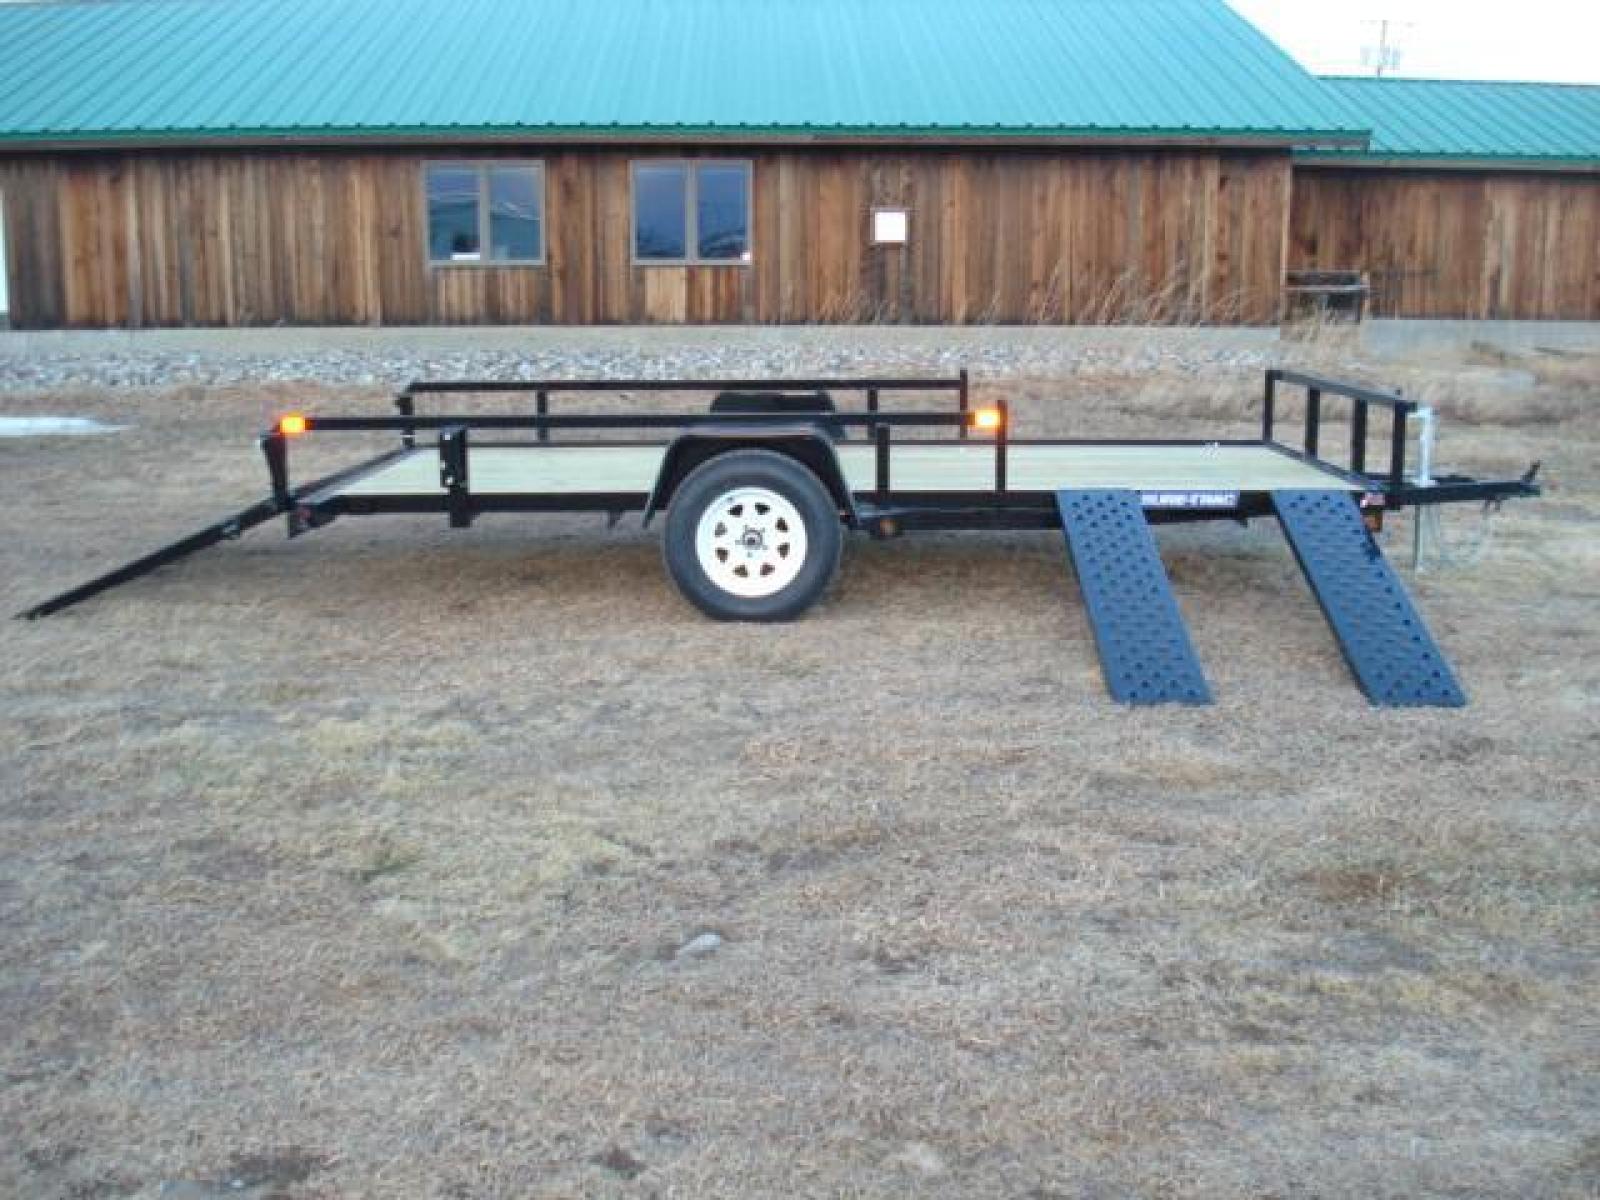 2023 Black SureTrac 7 x 14 ATV , located at 310 West 1st Ave, Big Timber, MT, 59011, (406) 860-8510, 45.833511, -109.957809 - SURE-TRAC 7 X 14 TUBE TOP ATV, 3K GVW, SIDE RAMPS, SPRING ASSISTED REAR RAMP, 15" RADIAL TIRES, TREATED WOOD DECK, LED LIGHTS, WIRING RUN IN CONDUIT, POWDER COAT FINISH, SPARE TIRE MOUNT. SURE-TRAC QUALITY FIT AND FINISH. OPTIONAL SPARE TIRE - $165.00. THE BEST TRAILERS AT THE BEST PRICE!!! Traile - Photo #5